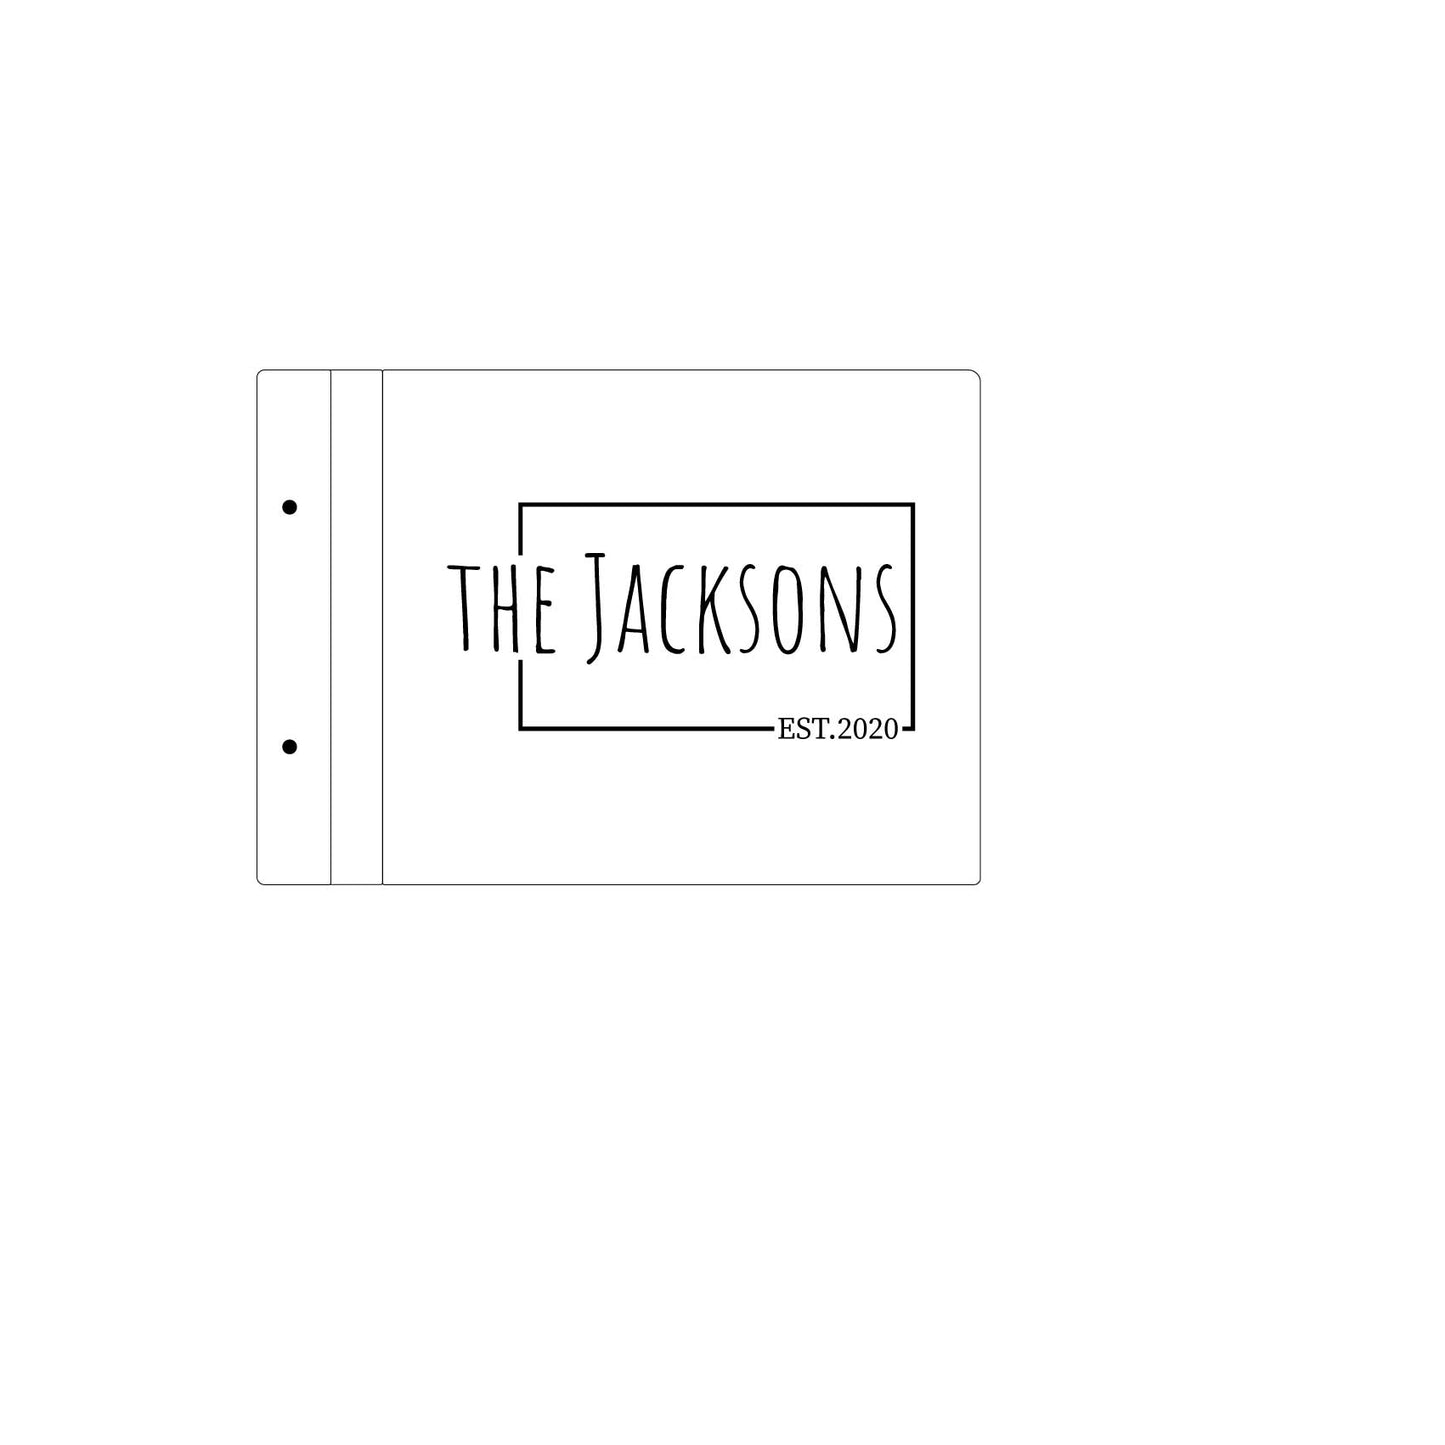 The Jackson guest book